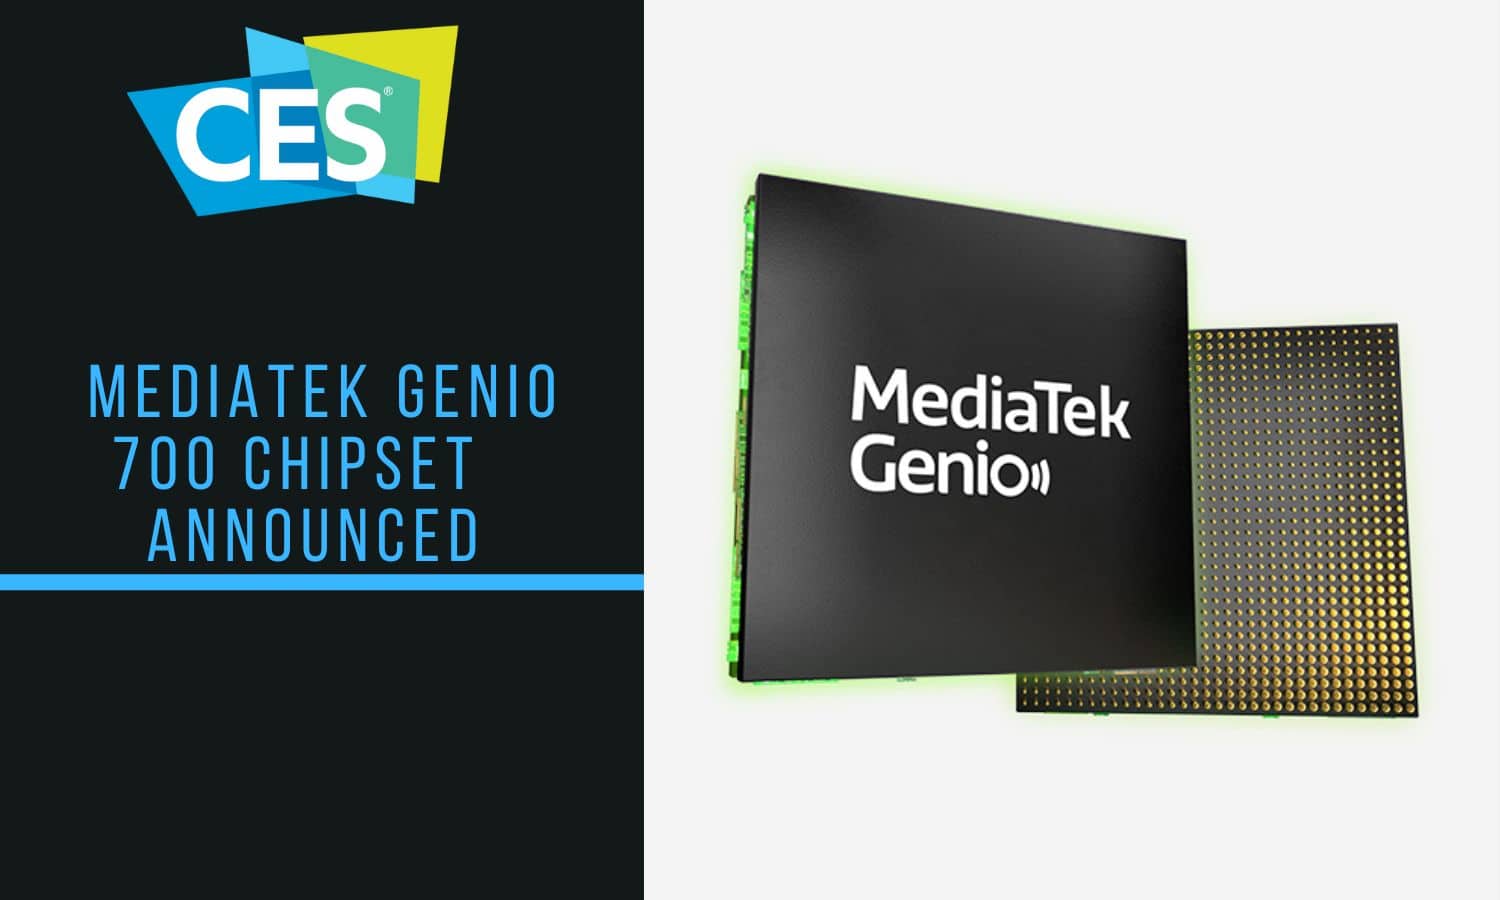 MediaTek Genio 700 Chipset for Smart Home IoT Devices launched